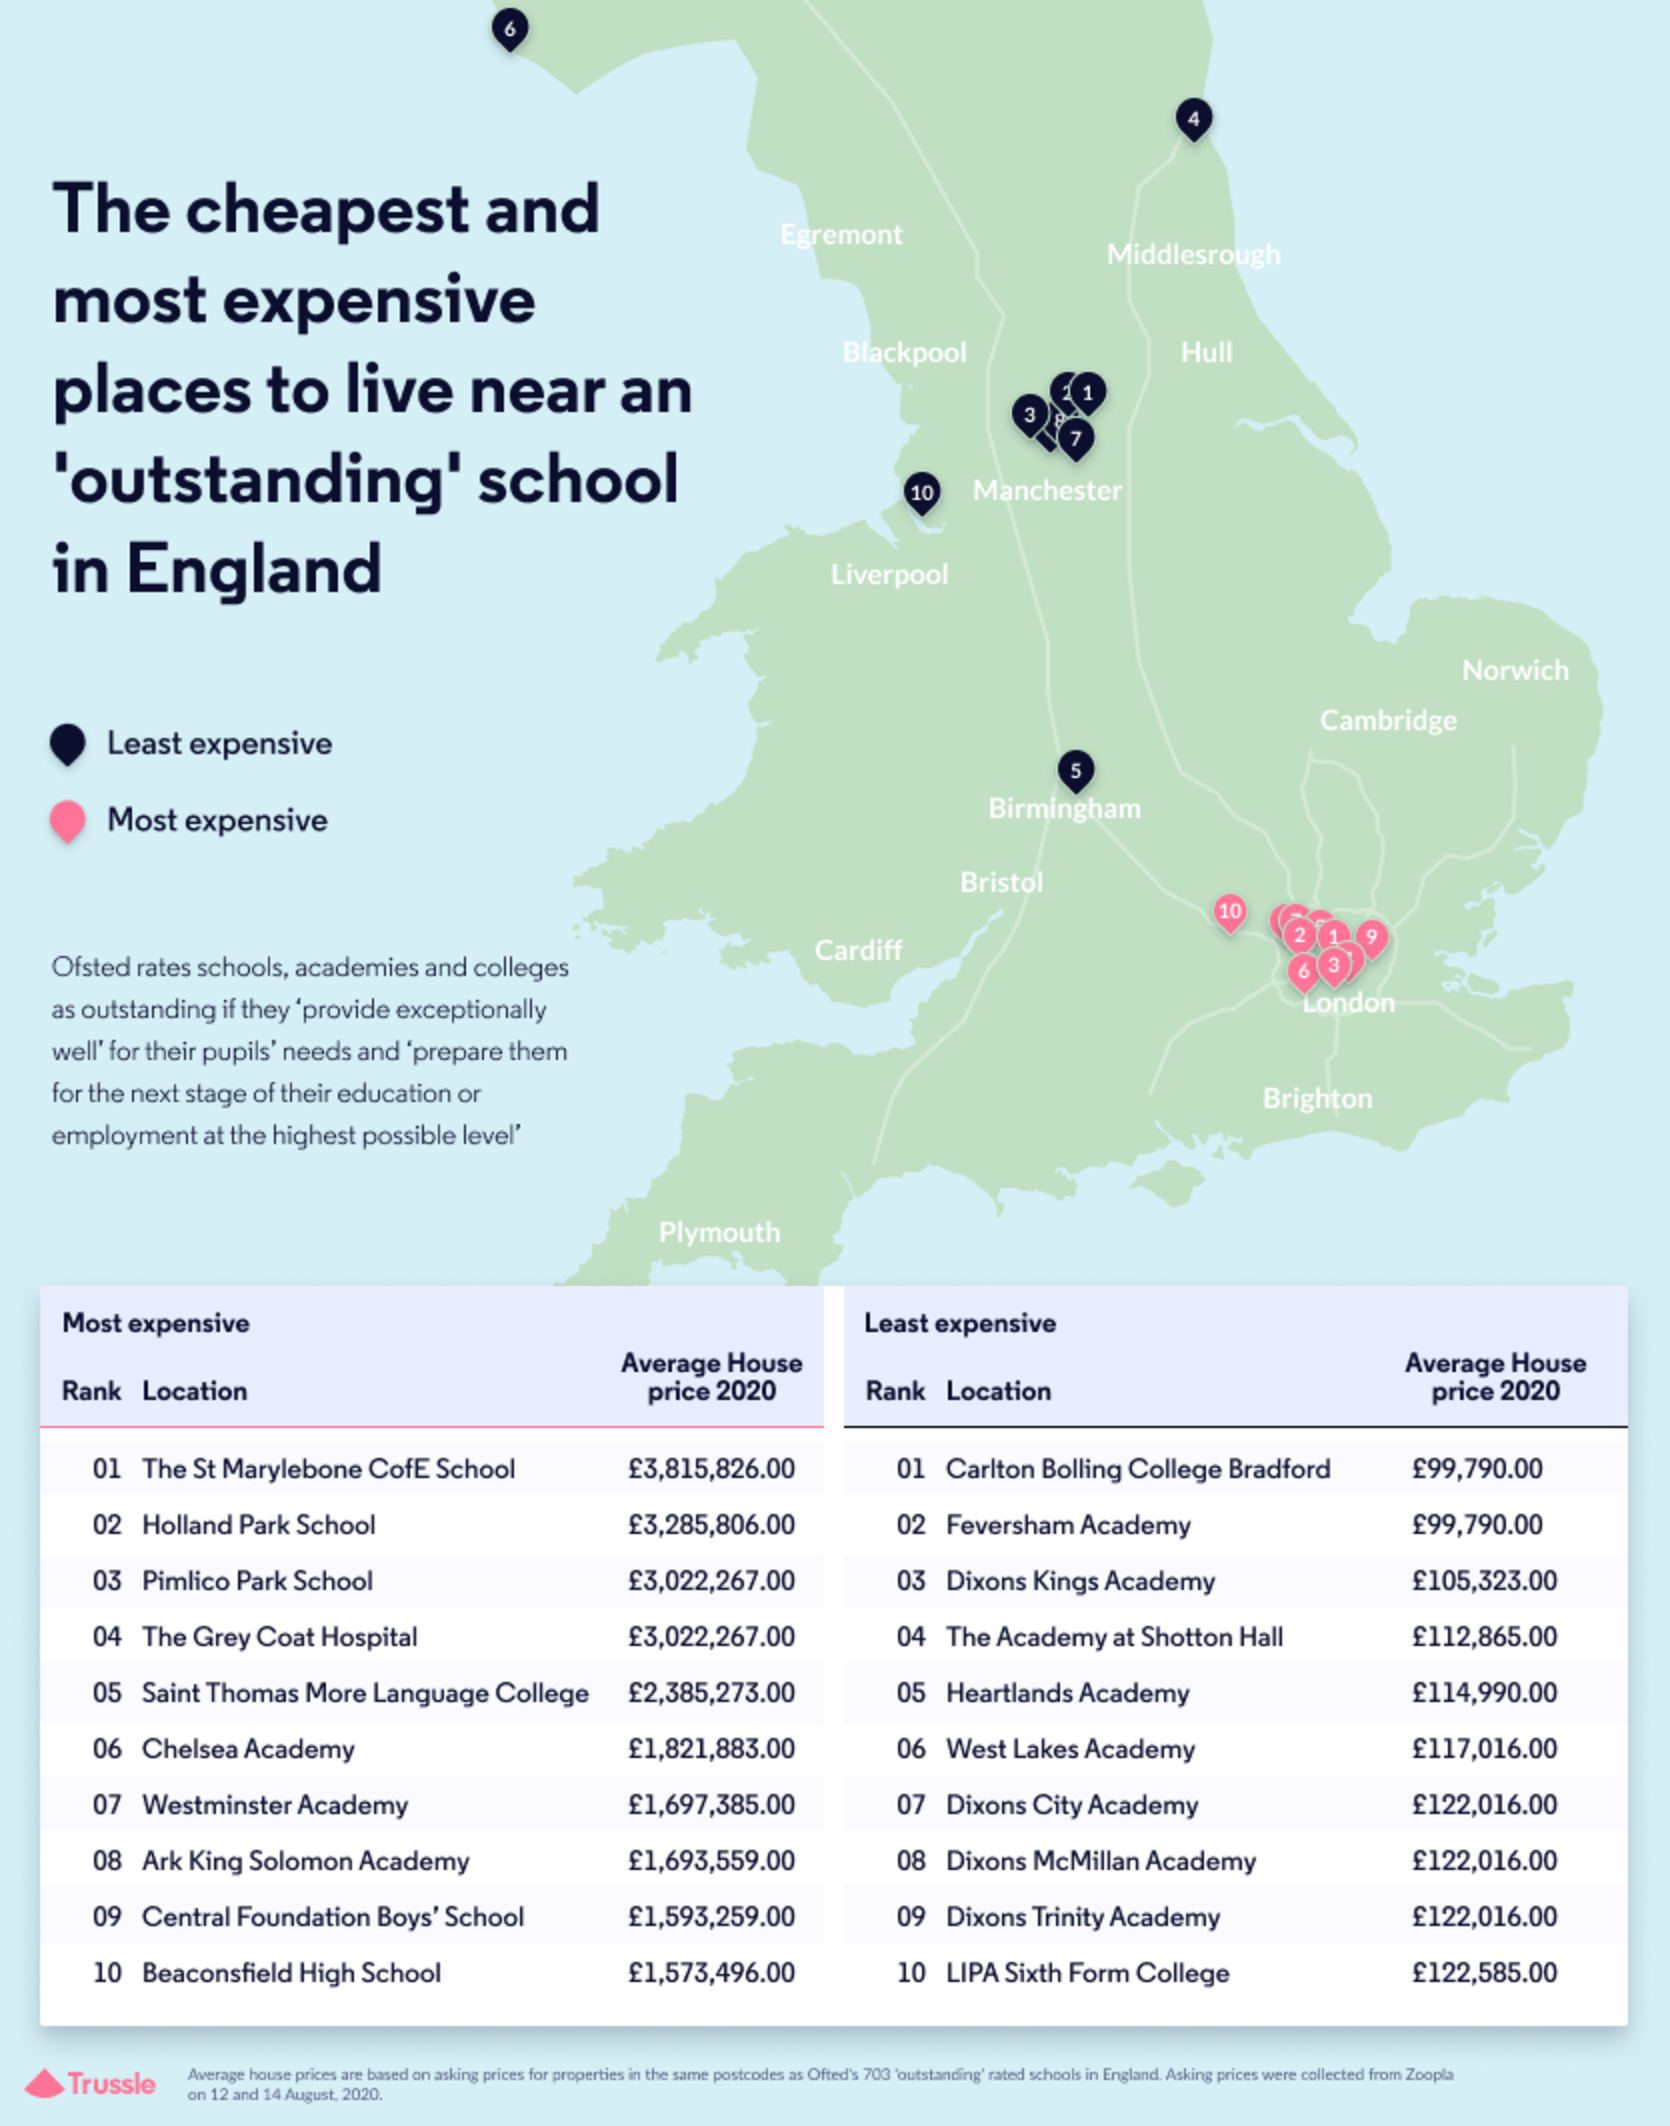 The cheapest and most expensive places to live near an 'outstanding' school in England